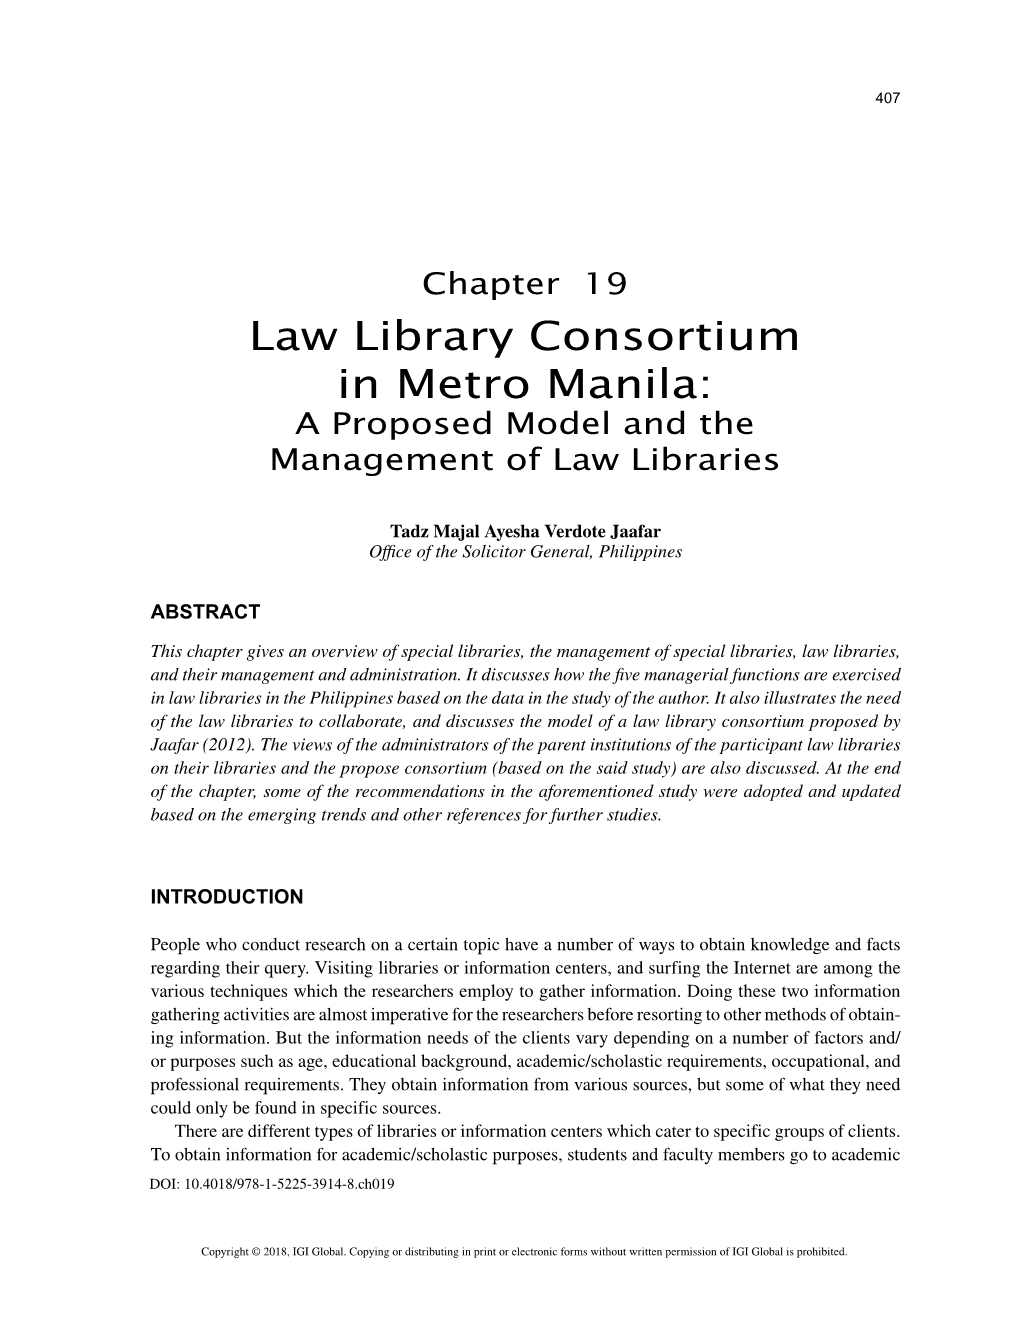 Law Library Consortium in Metro Manila: a Proposed Model and the Management of Law Libraries